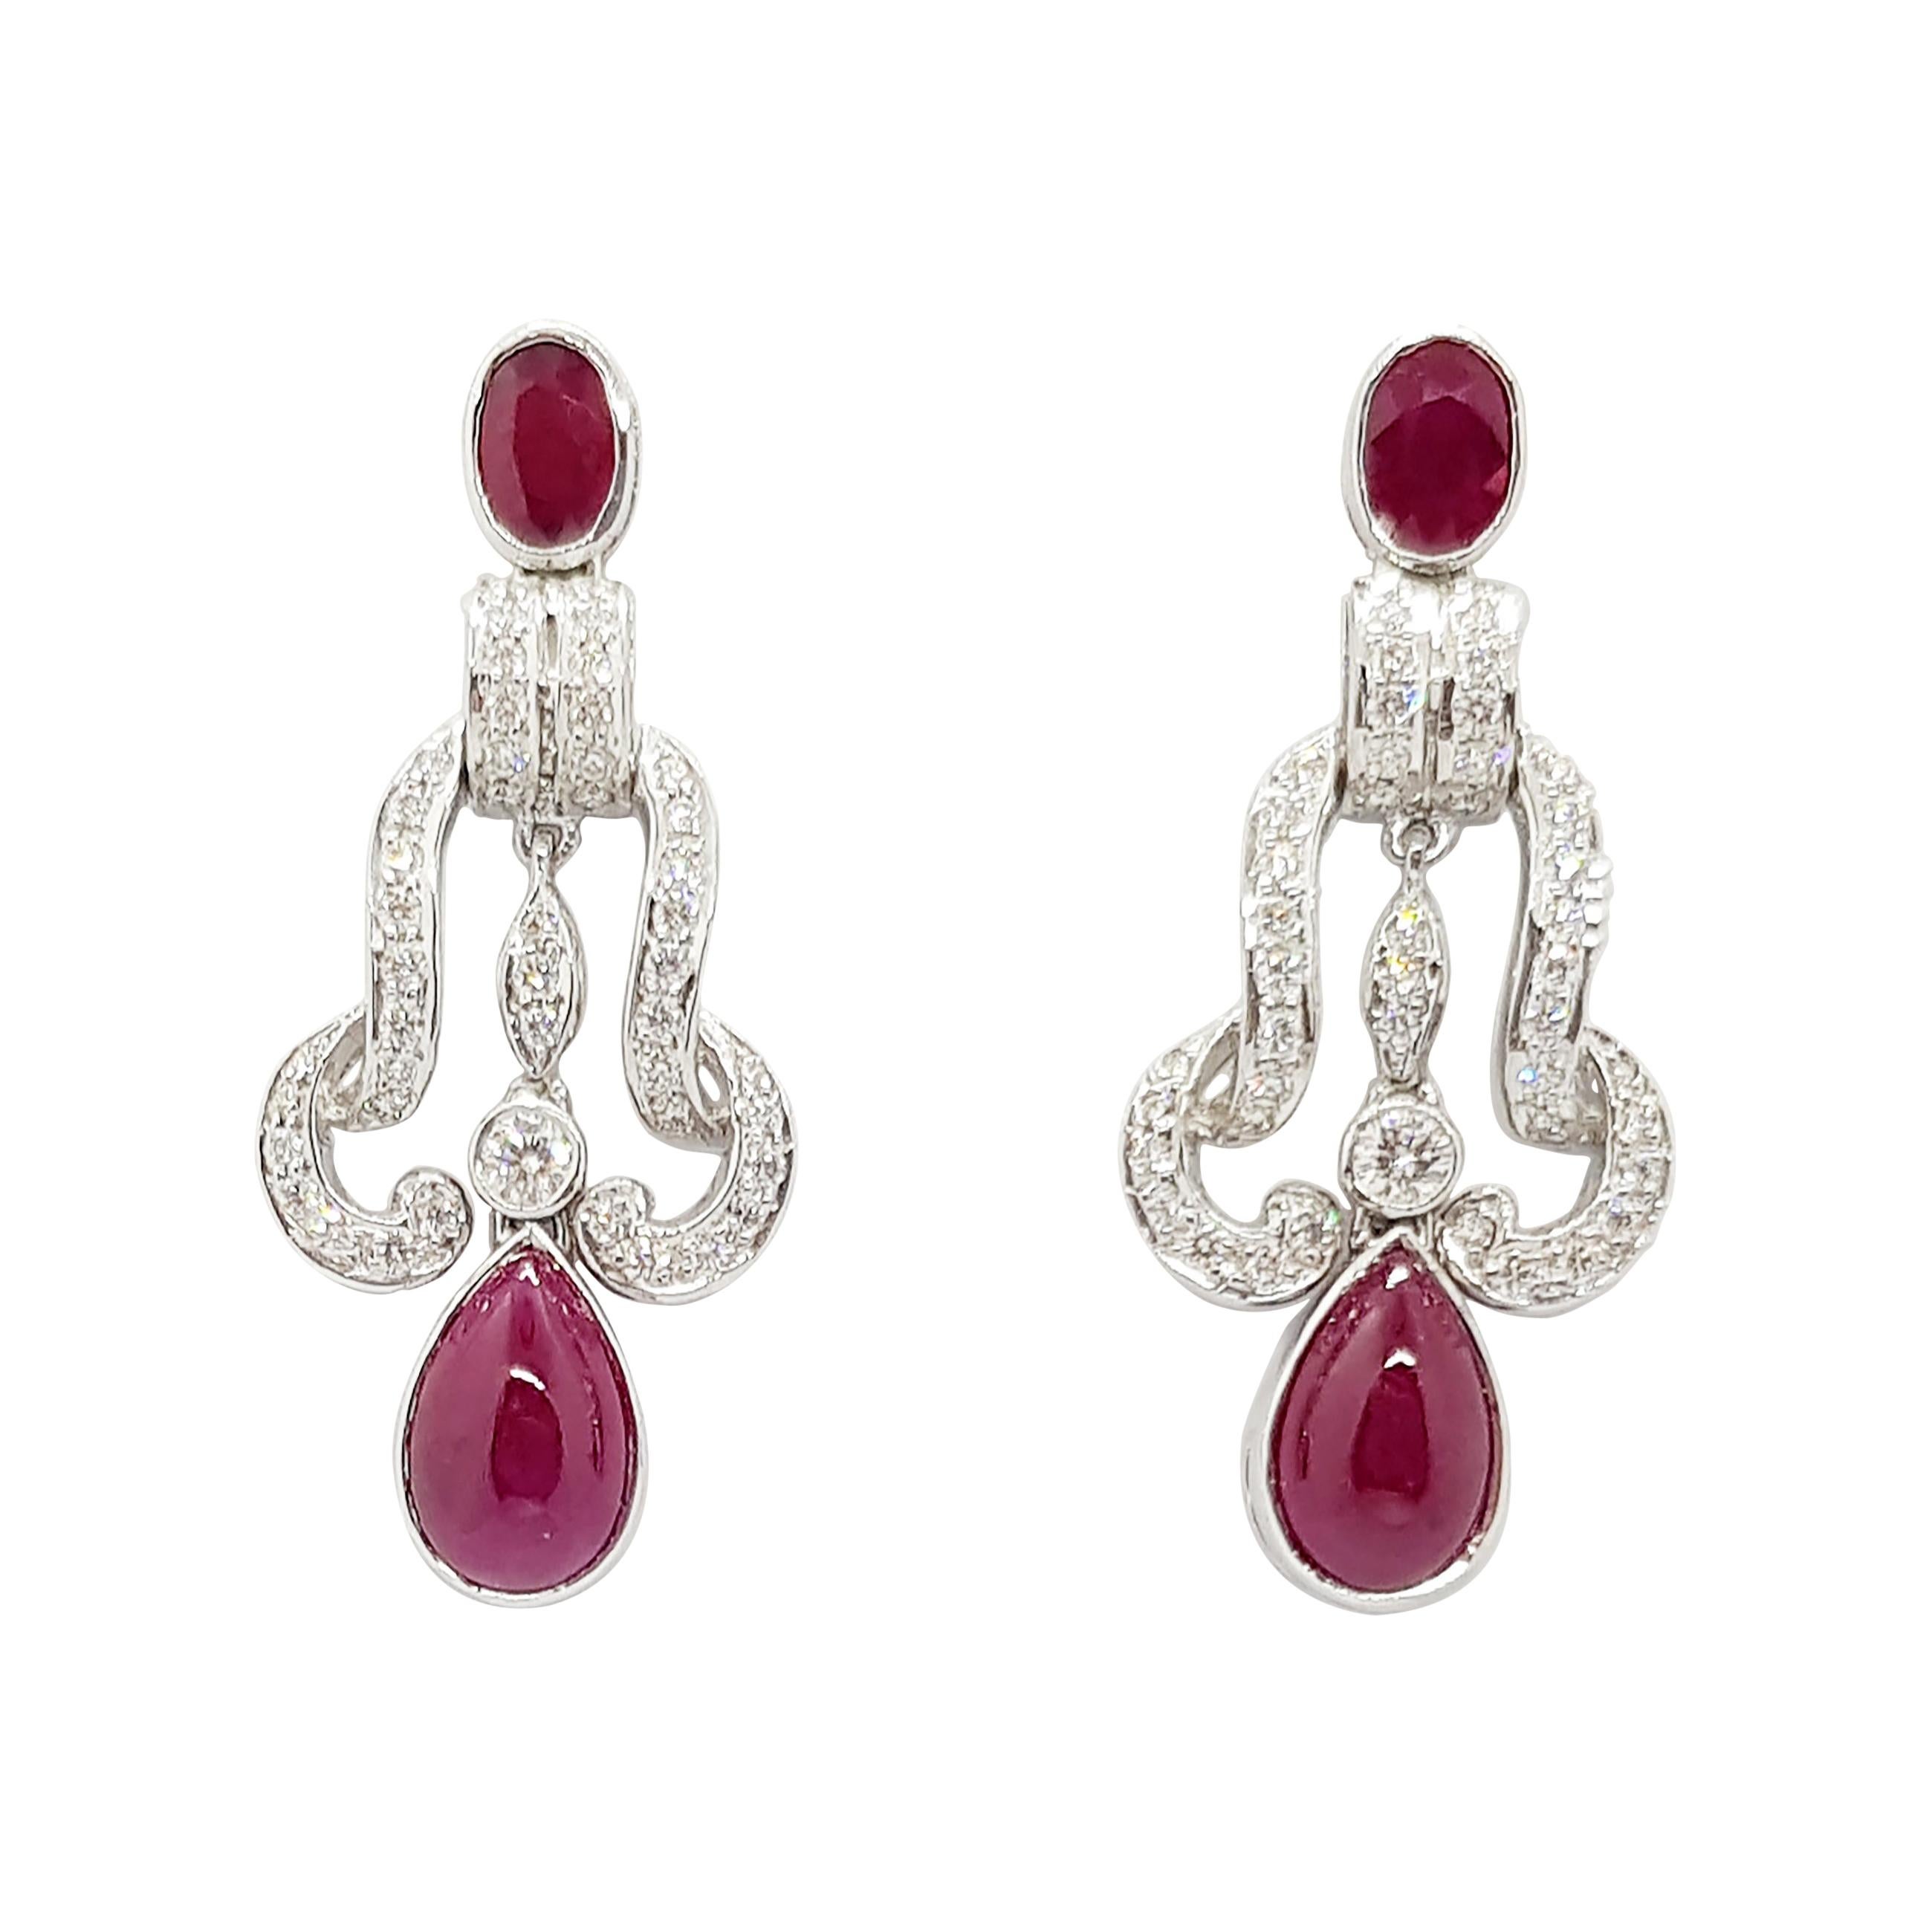 Cabochon Ruby, Ruby with Diamond Earrings Set in 18 Karat White Gold Settings